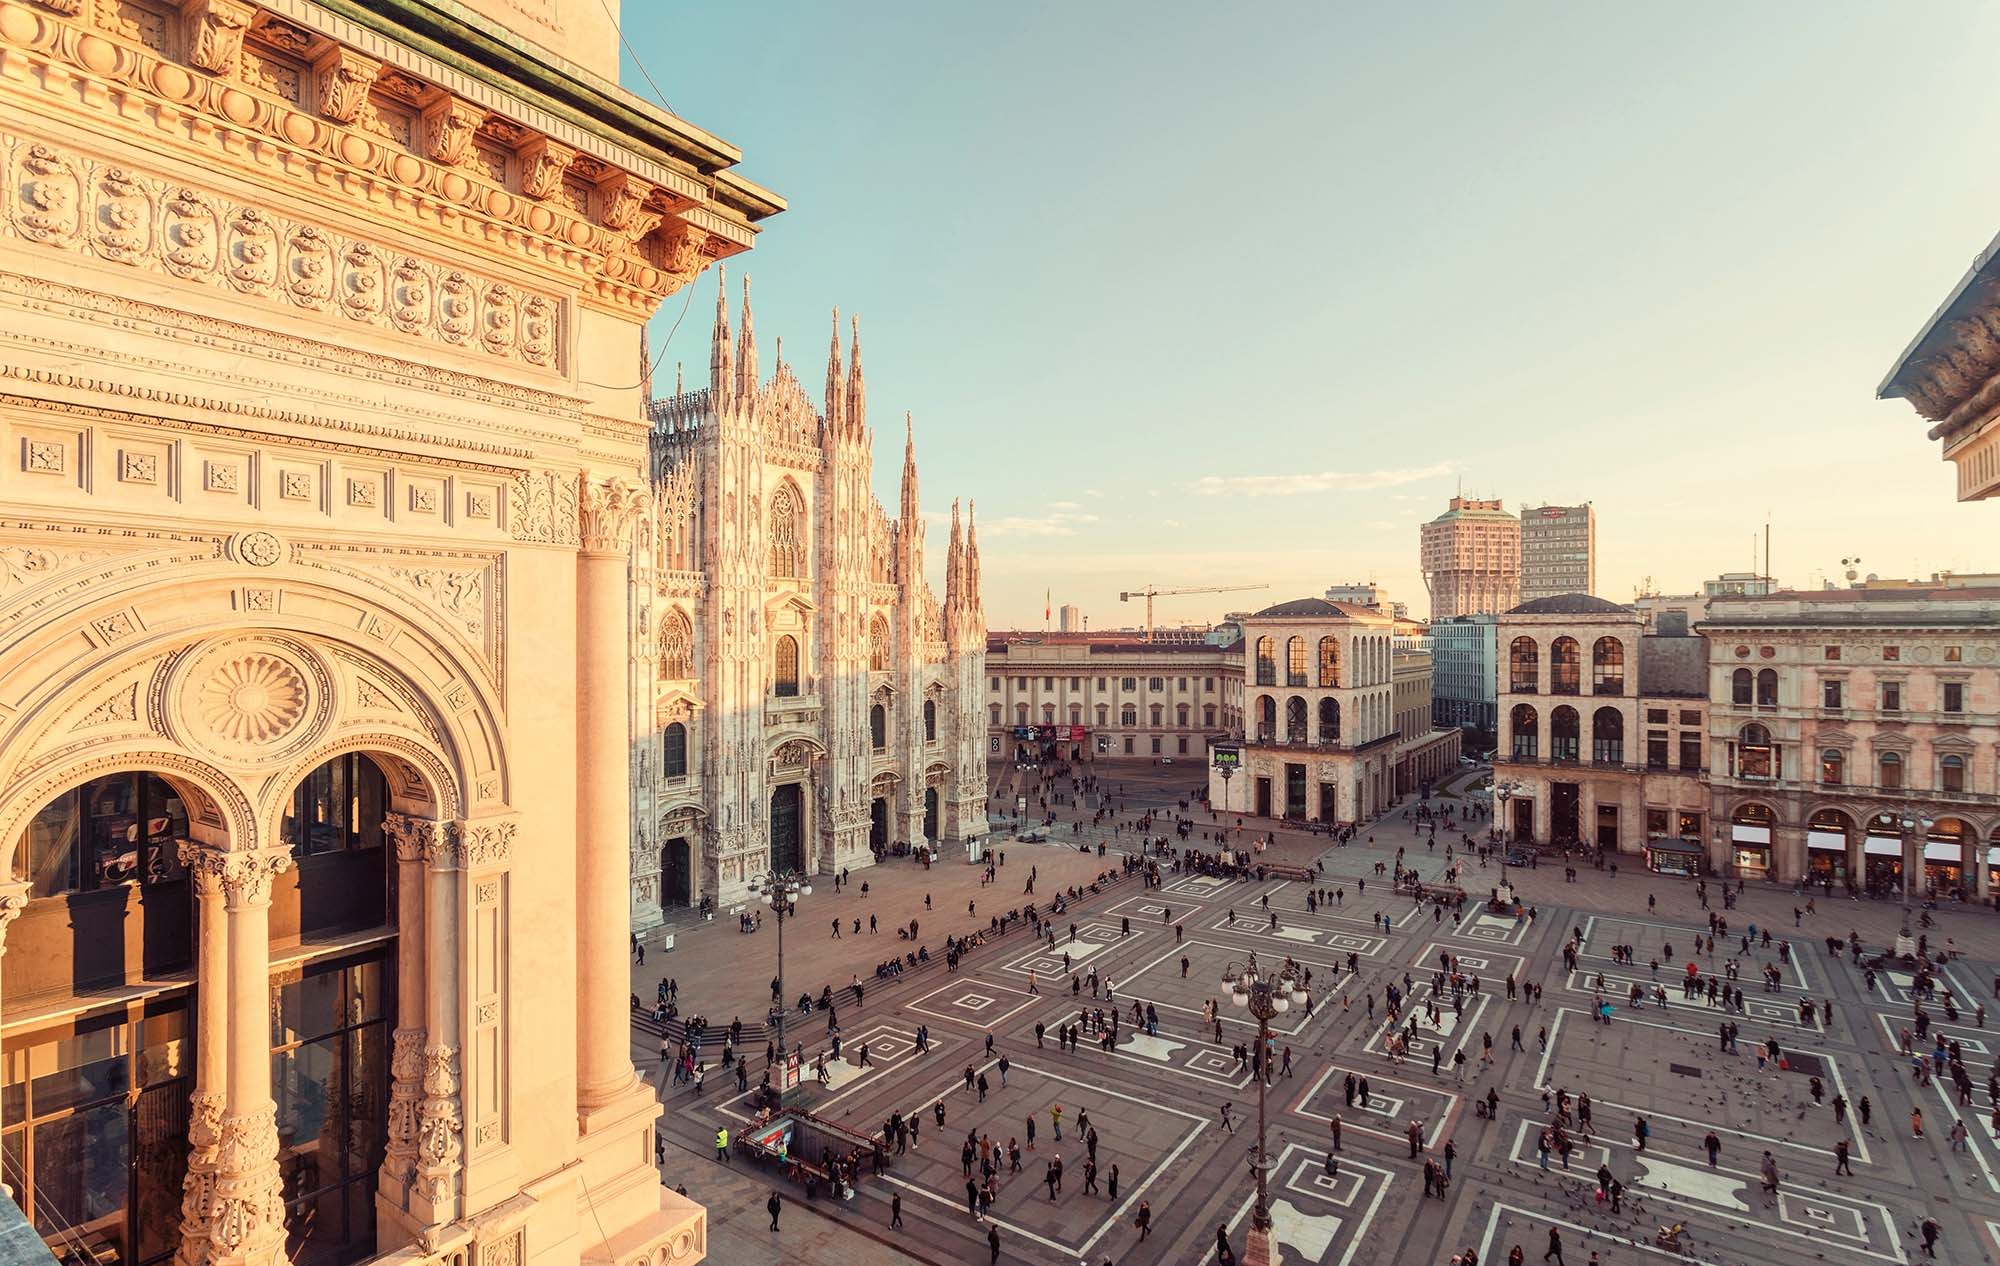 Italy, Lombardy, Piazza del Duomo in Milan seen from the Galleria Vittorio Emanuele II